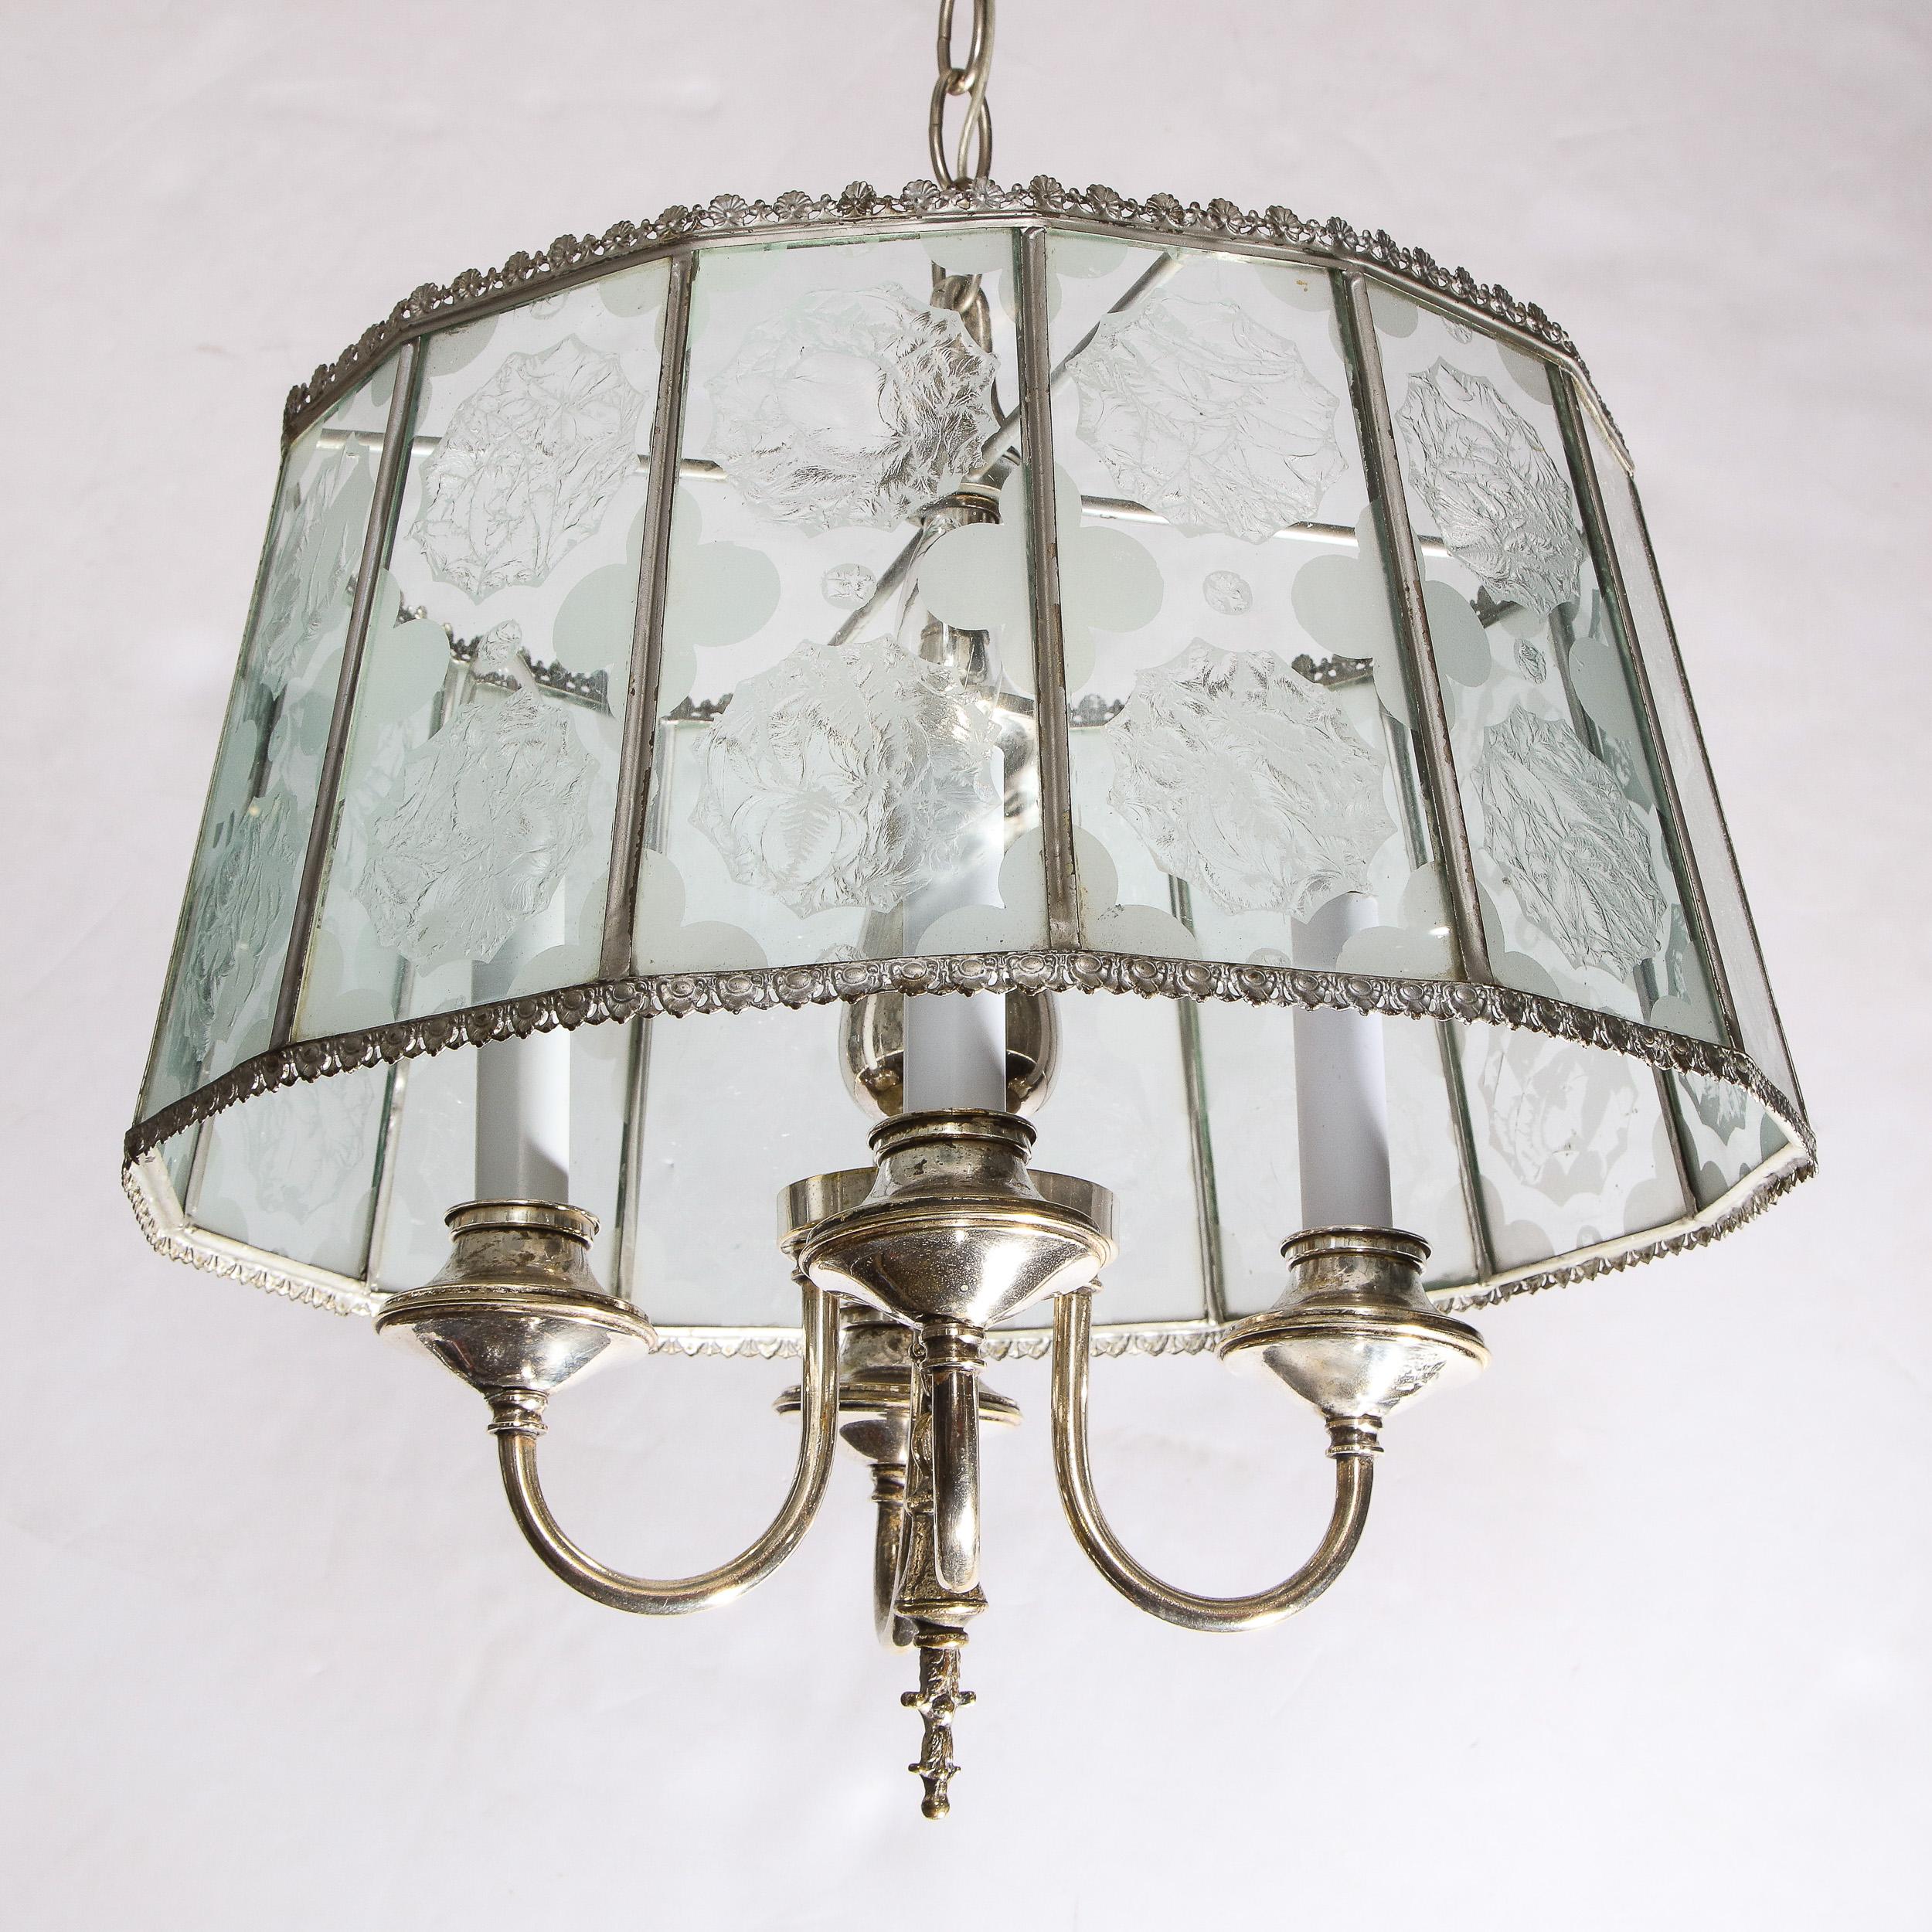 Bronze Art Deco Revival Lantern Translucent Glass Pendant with Silvered Fittings